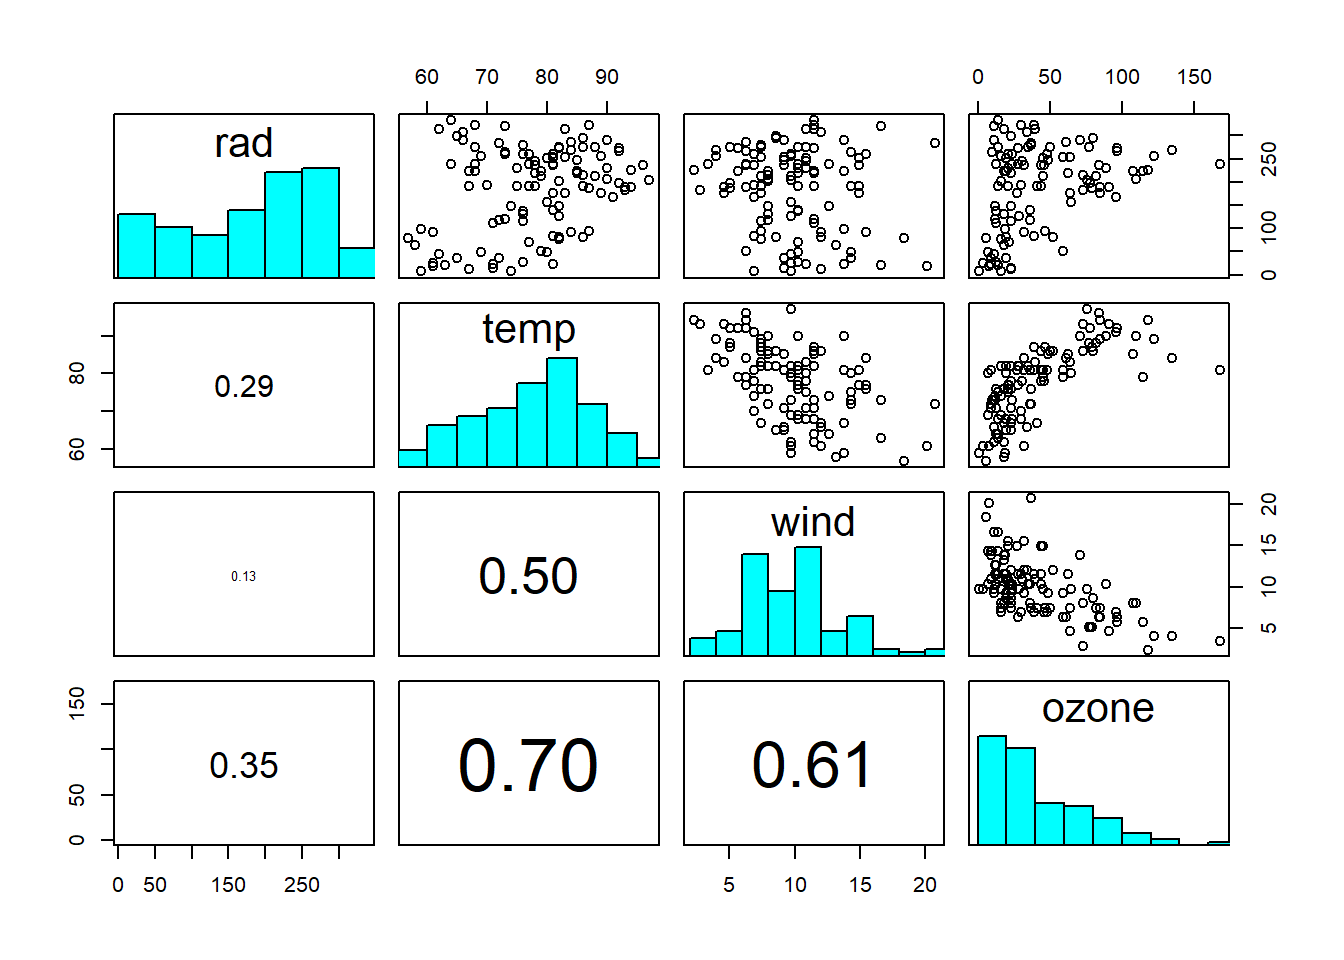 Scatterplot matrix of ozone dataset: rad = solar radiation intensity; temp = air temperature; wind = wind speed; ozone = ground-level ozone concentration. The diagonal shows the histograms of the individual variables. The lower triangle shows the linear correlation coefficients, with font size proportional to size of correlation. Data from: @crawley2012